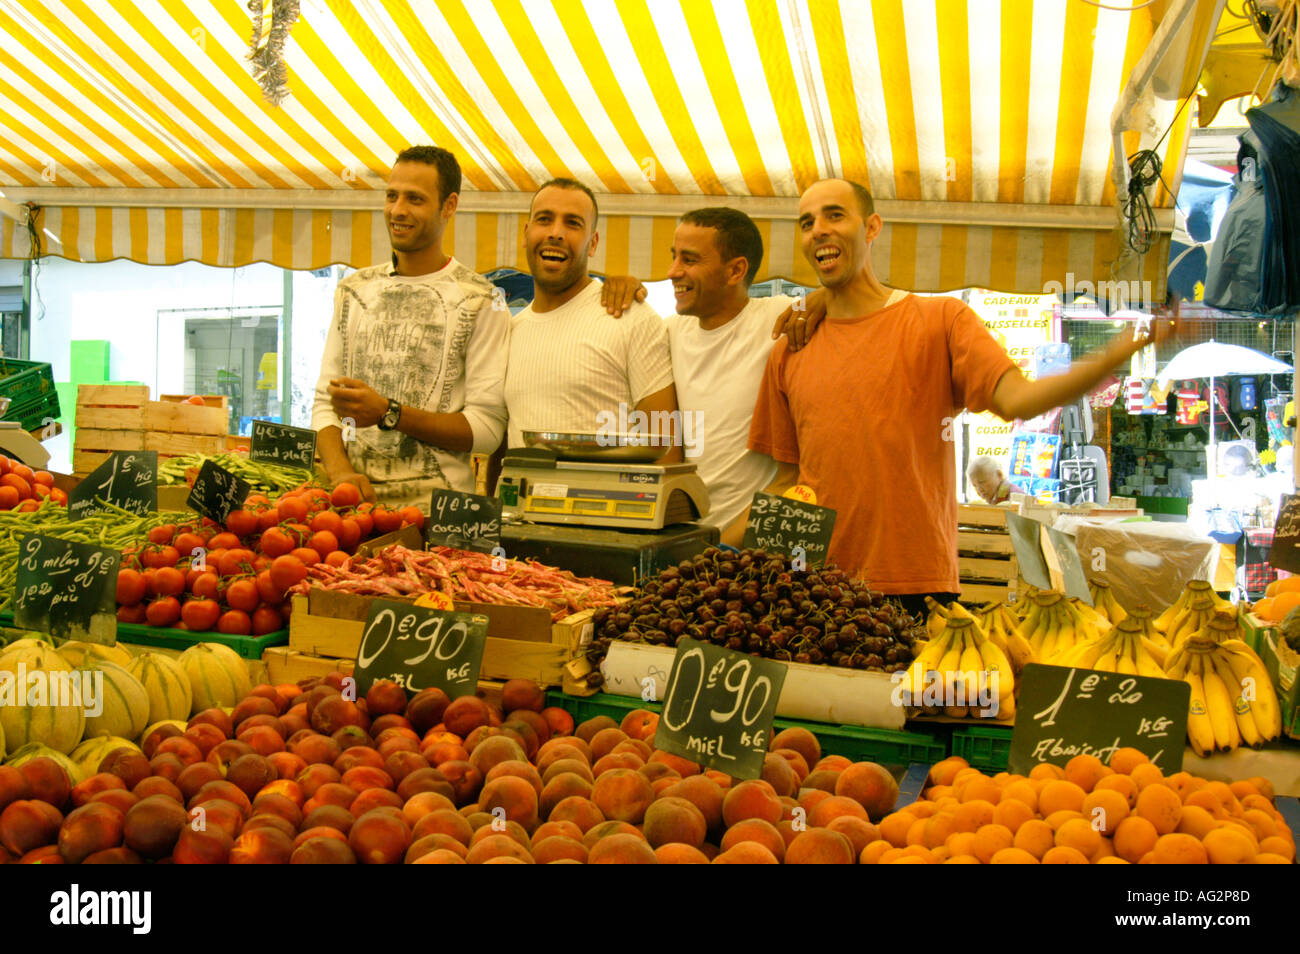 France Marseille Market in Marche des Capucins Noailles Area is heavily Arab as are most vendors like these cheerful types Stock Photo